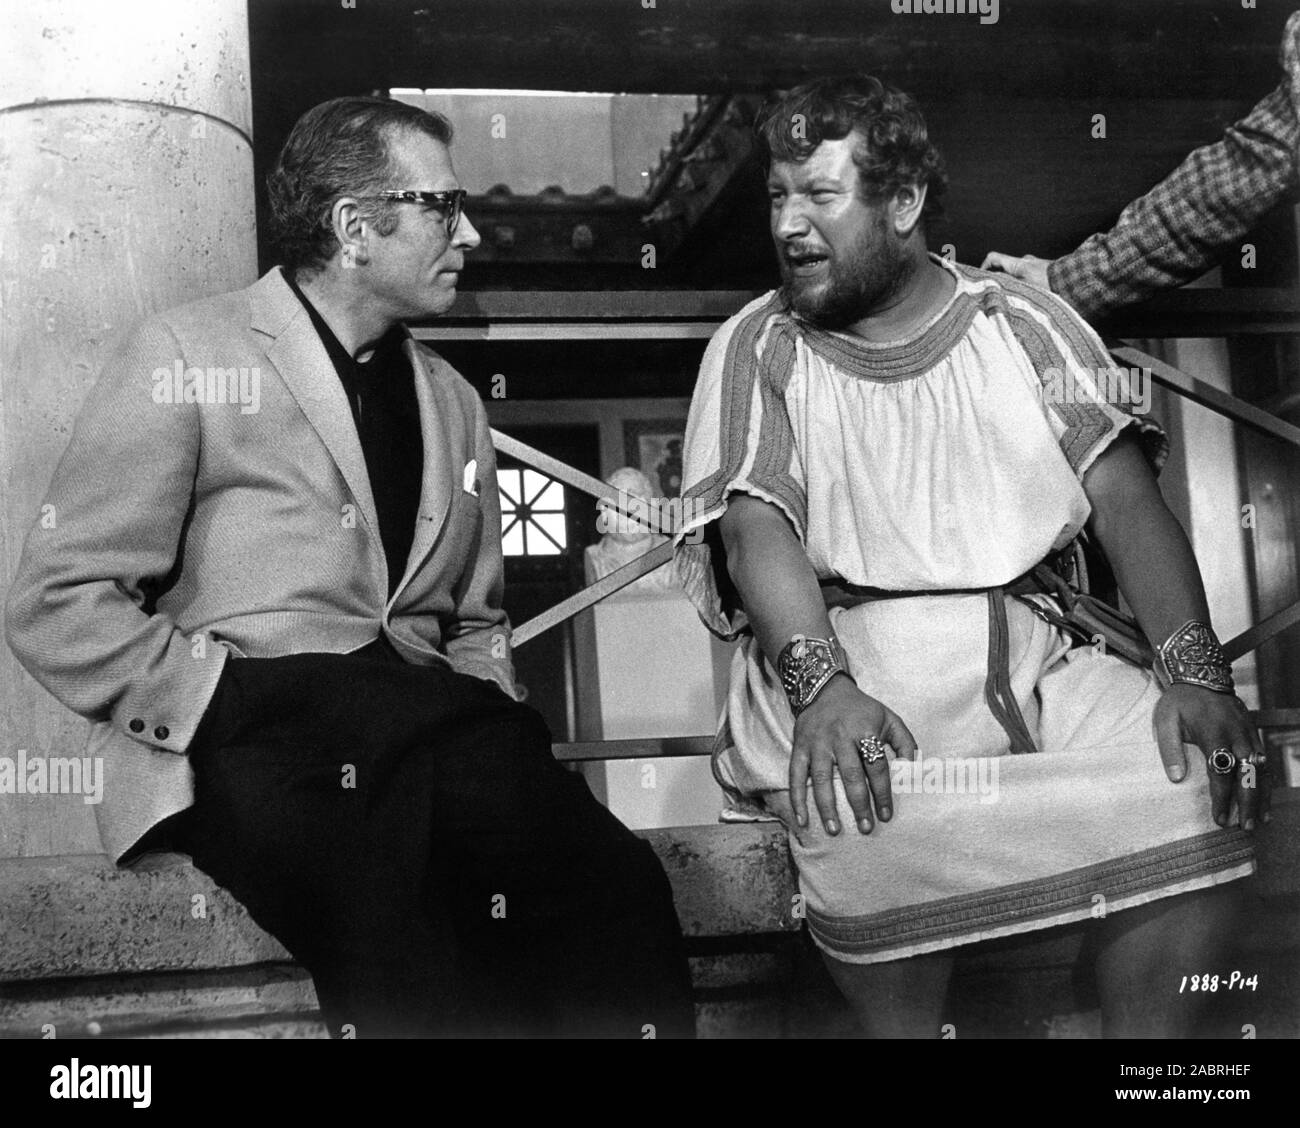 LAURENCE OLIVIER (out of costume) visits PETER USTINOV in costume as Batiatus on set candid during filming of SPARTACUS 1960 director STANLEY KUBRICK novel Howard Fast screenplay Dalton Trumbo executive producer Kirk Douglas Bryna Productions / Universal Pictures Stock Photo